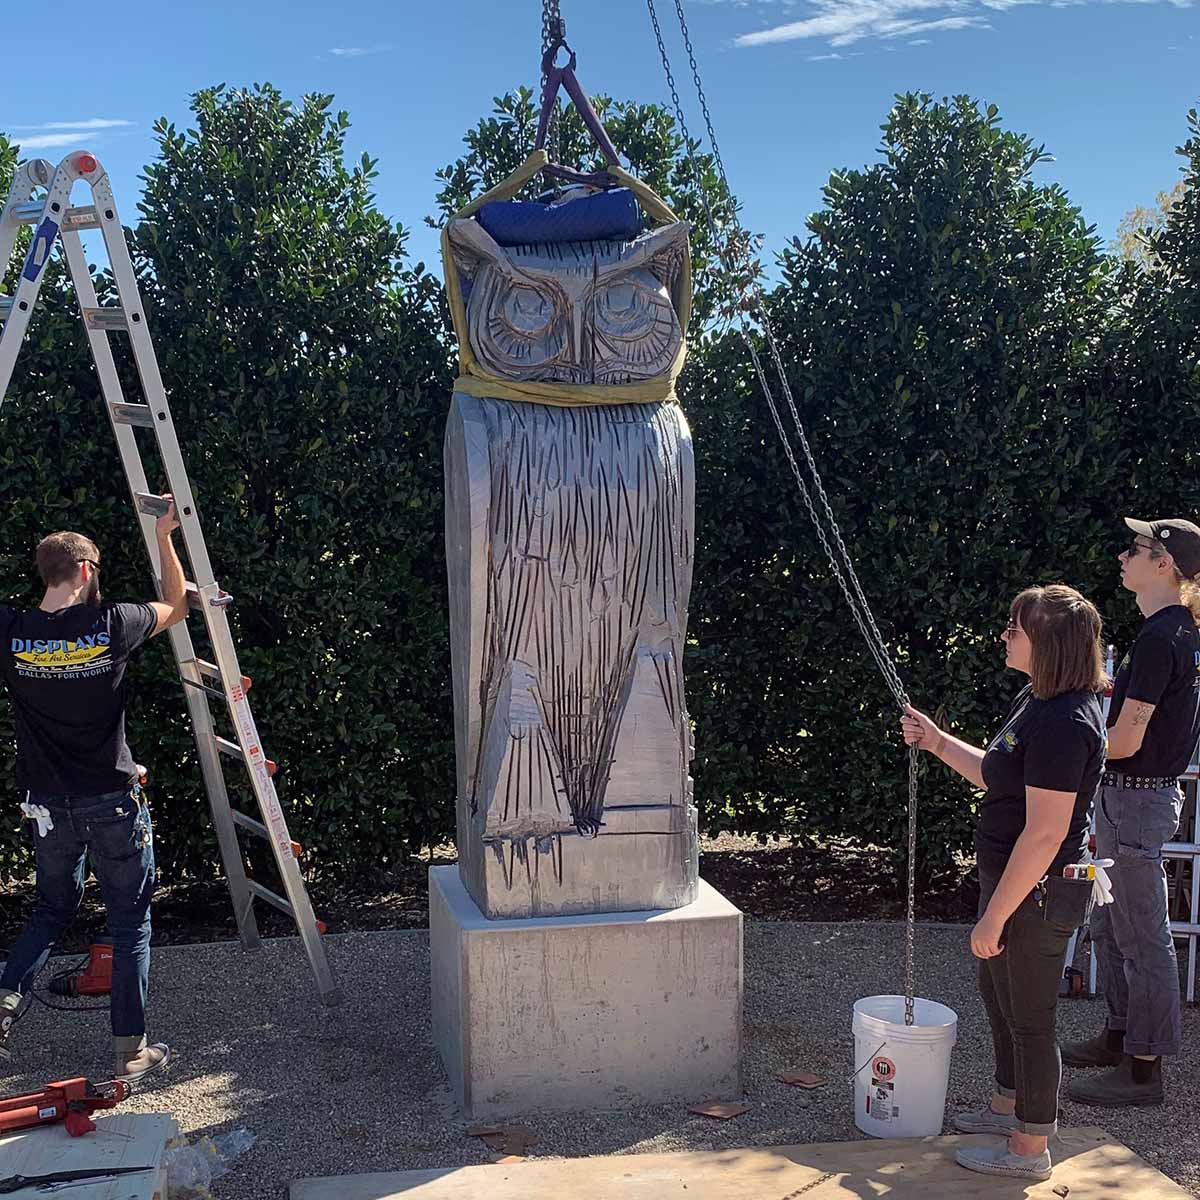 Three Displays Fine Art Services team members install a large statue of an owl outdoors.